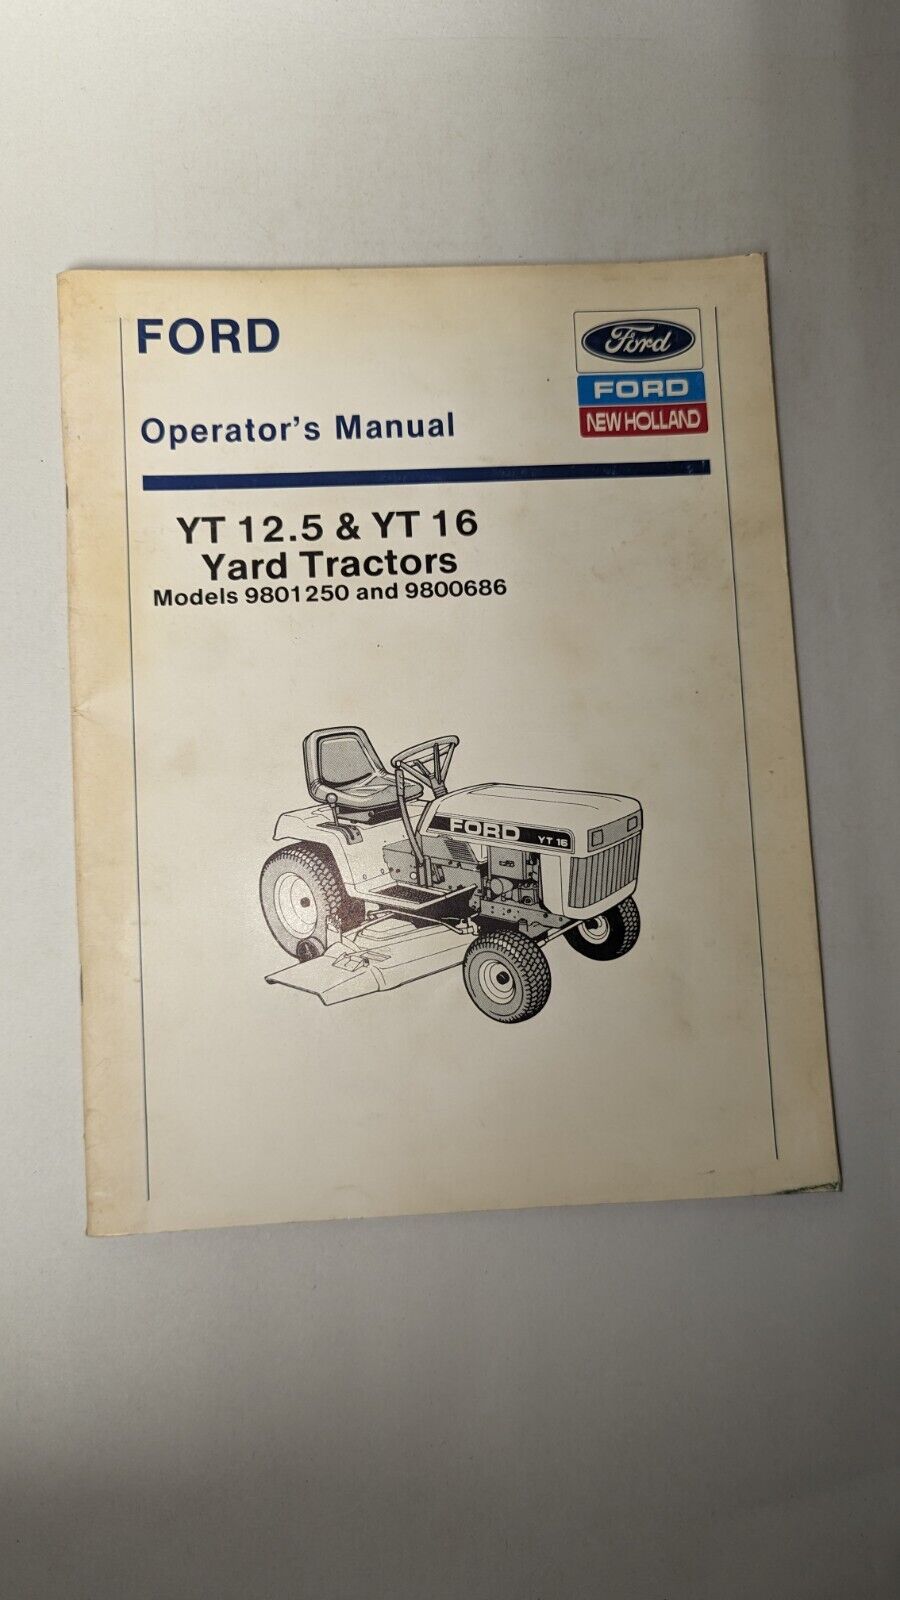 Ford Series YT 12.5 & YT 16 Lawn Tractor Operator's Manual P GC USED